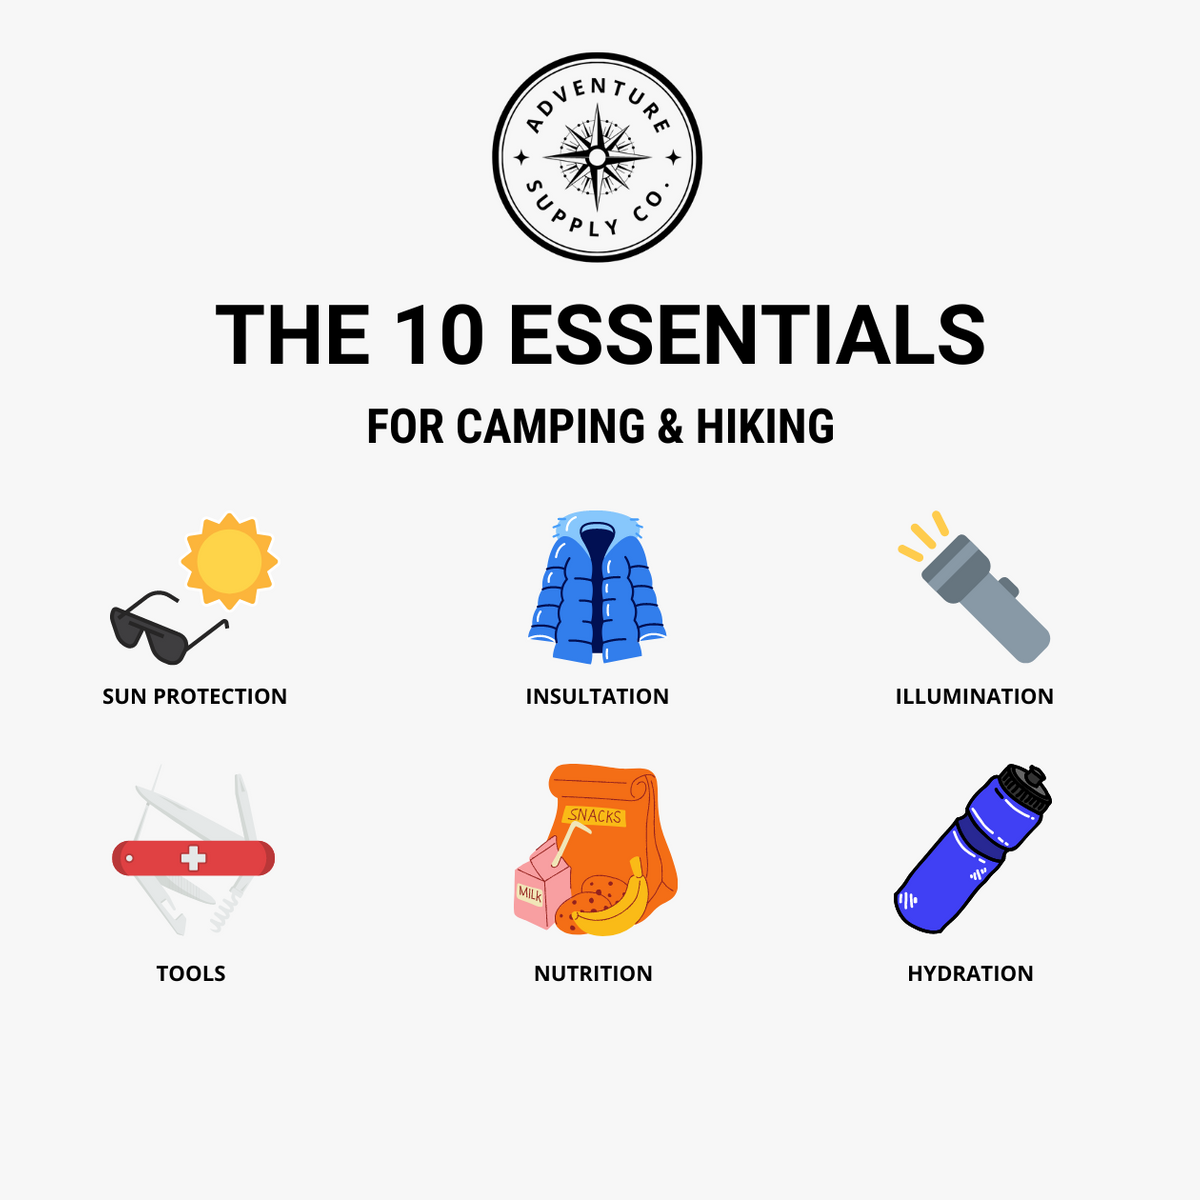 The “10 Essentials” to take on every outdoor adventure